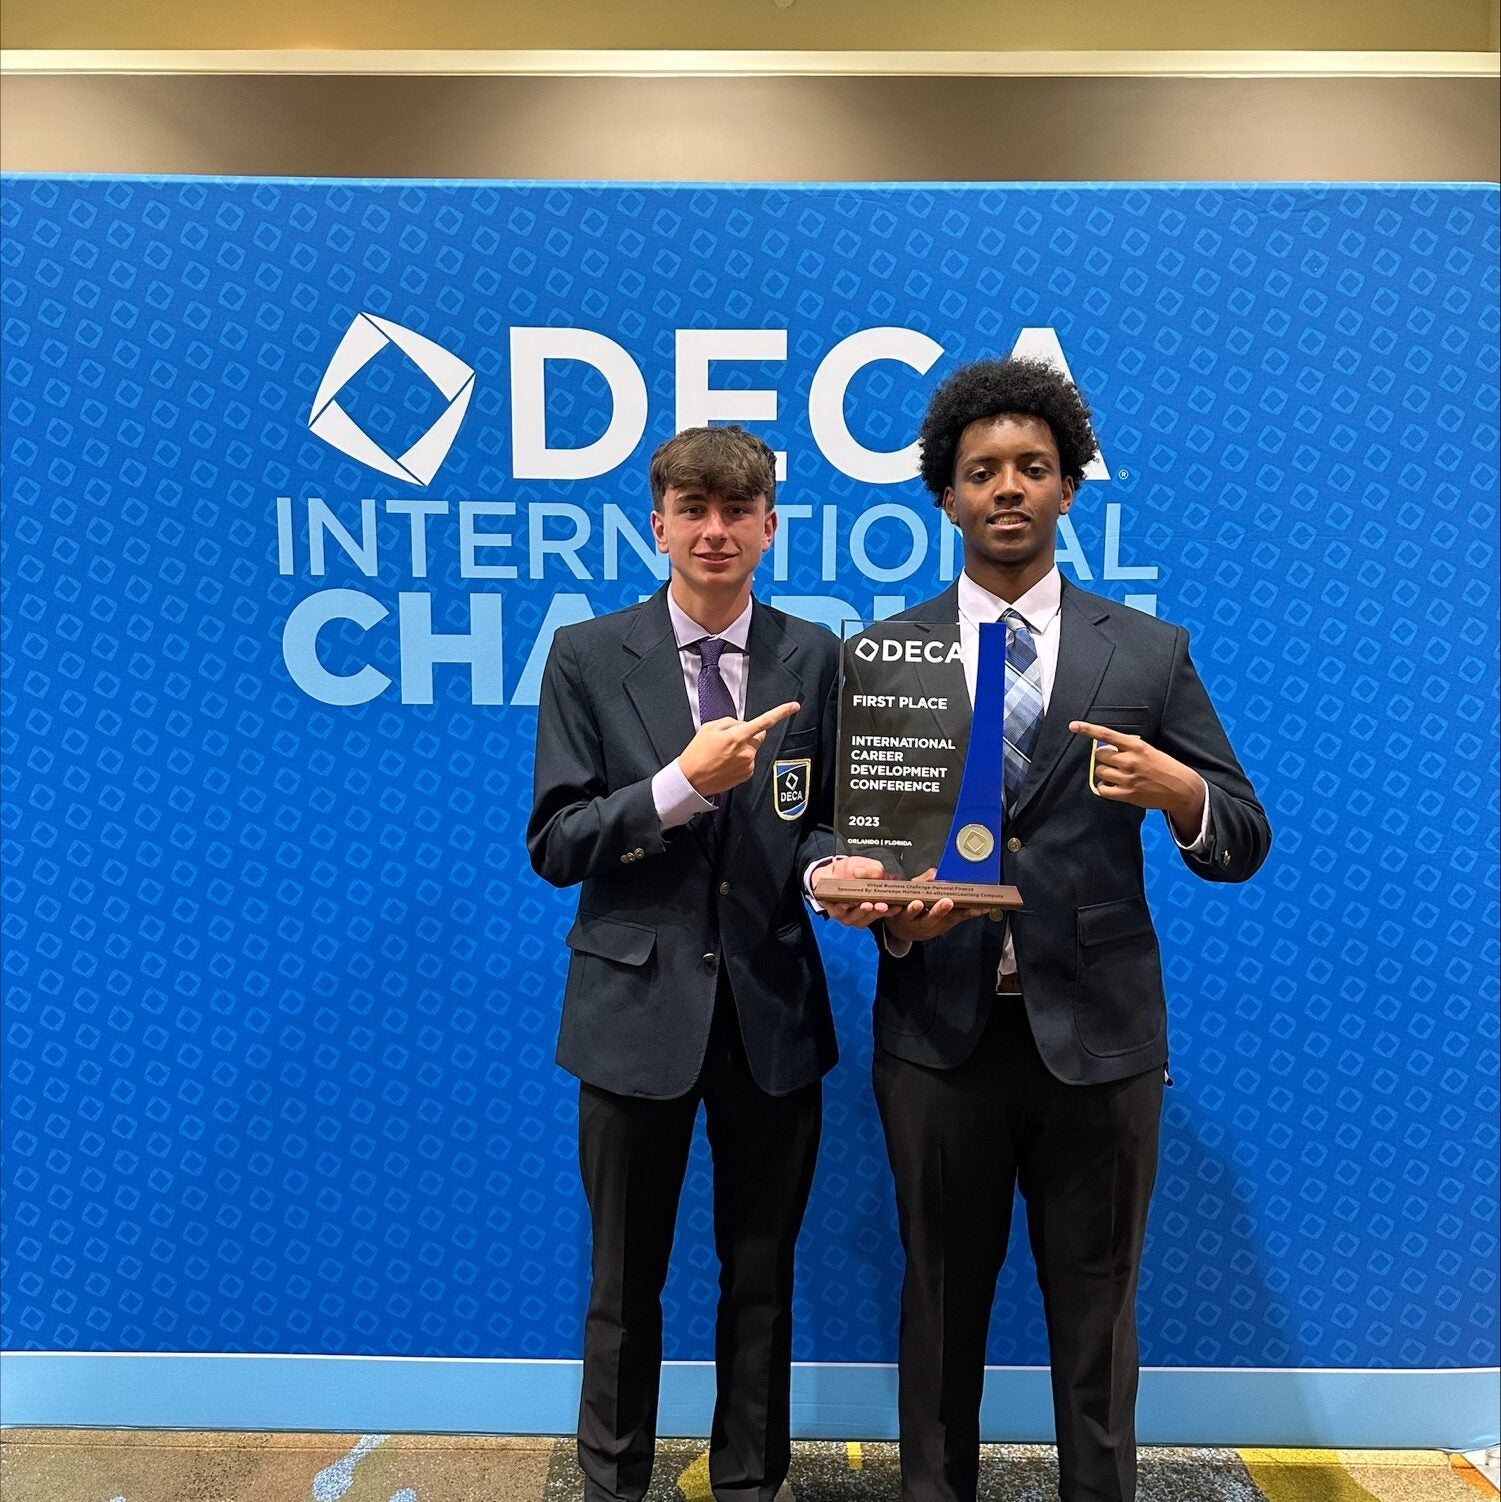 SPS students at DECA International competition